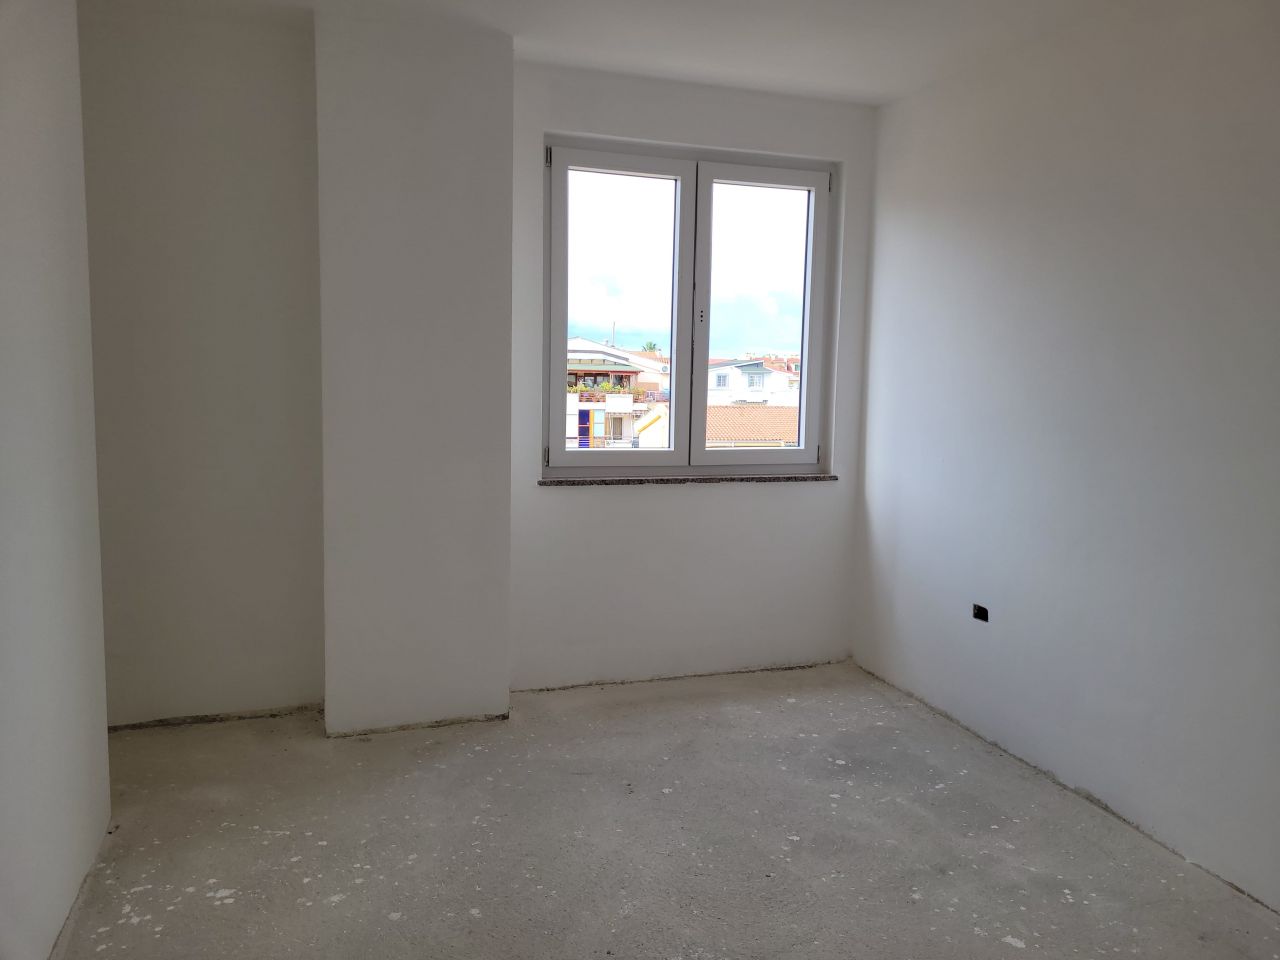 Property For Sale In Golem Apartment In Durres Albania